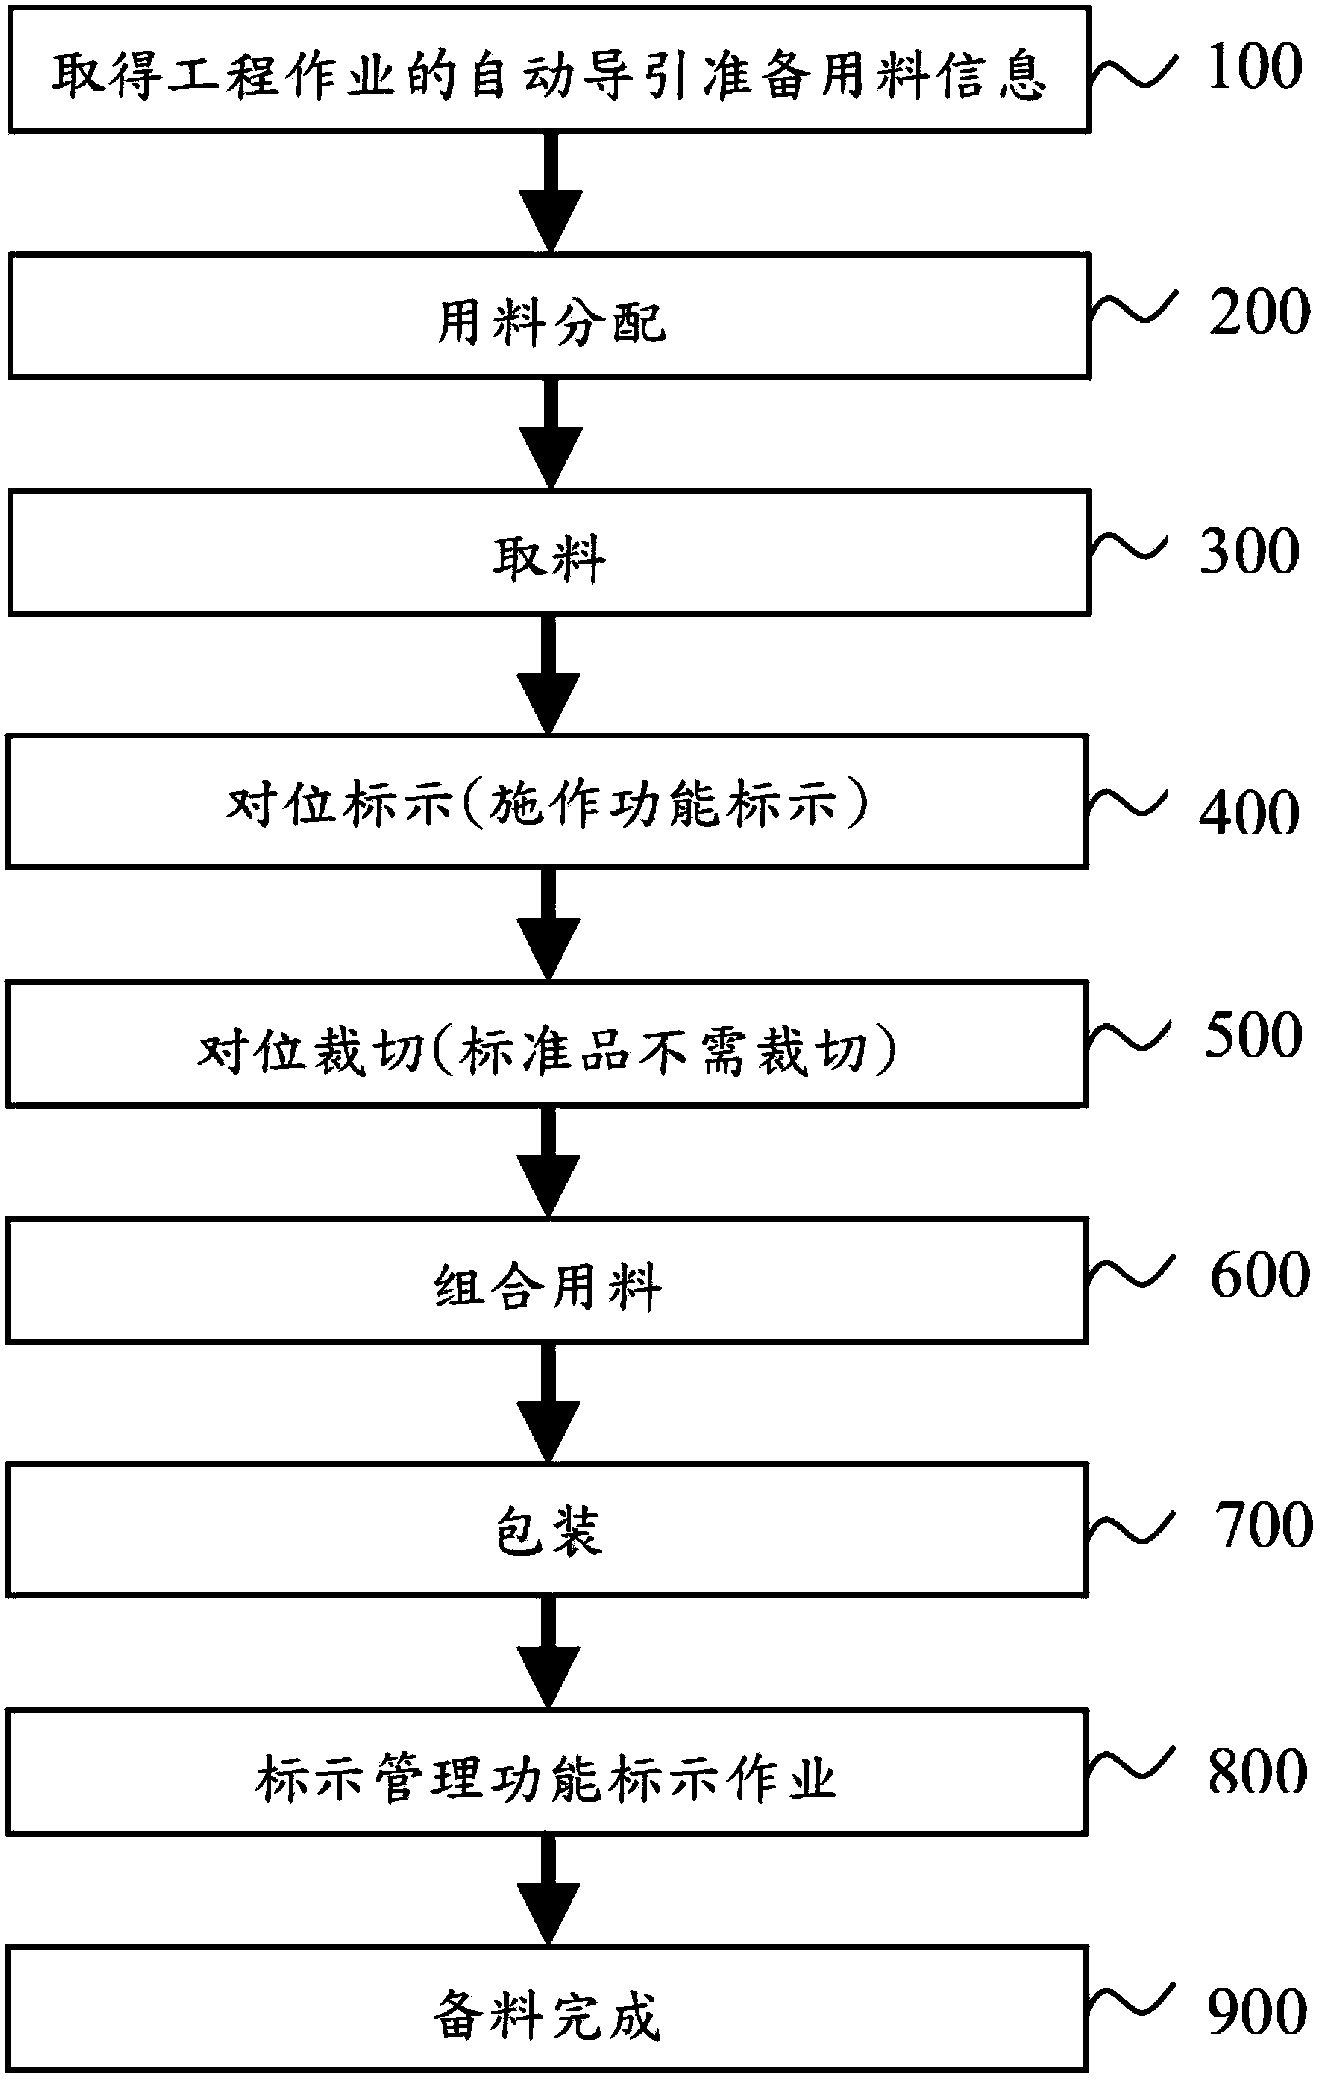 Method for manufacturing automatic guidance project construction material and automatic guidance project operation material